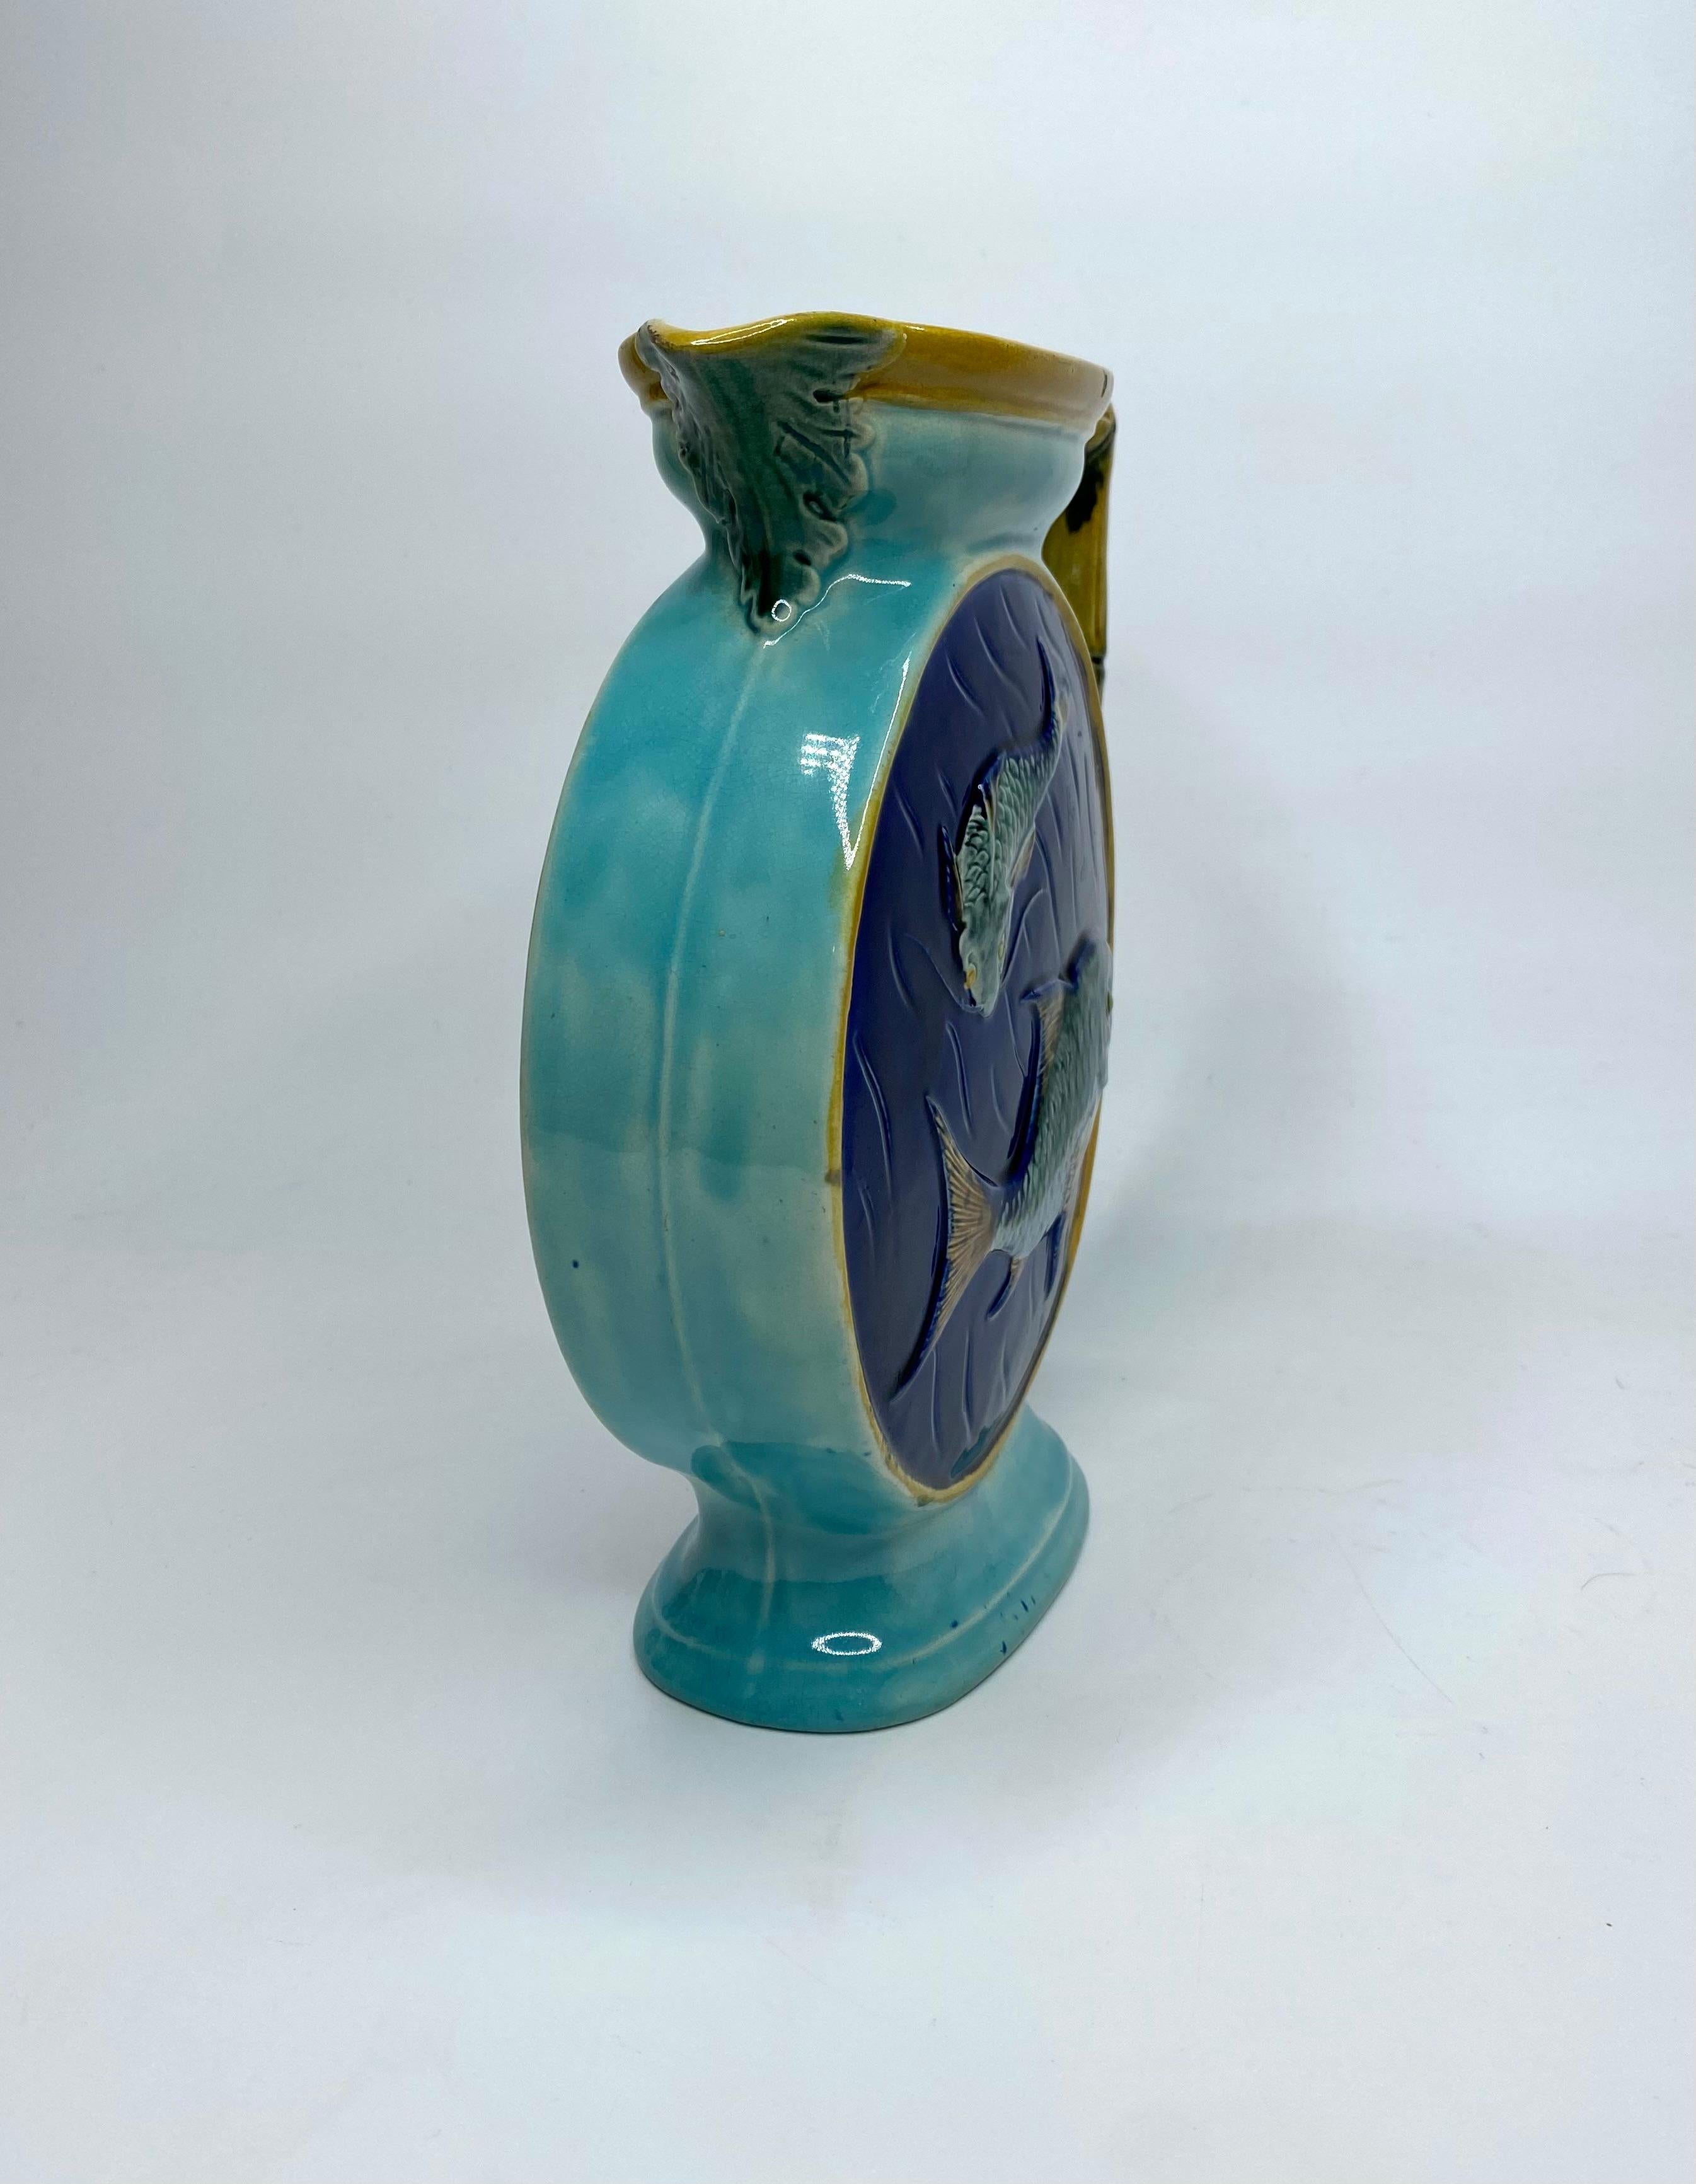 Joseph Holdcroft pottery majolica jug, c. 1870. The Japanesque style, circular jug, moulded to both sides with fish swimming. Having an angular, bamboo style handle, and raised upon an oval foot rim.
Covered in typical majolica glazes.
Impressed